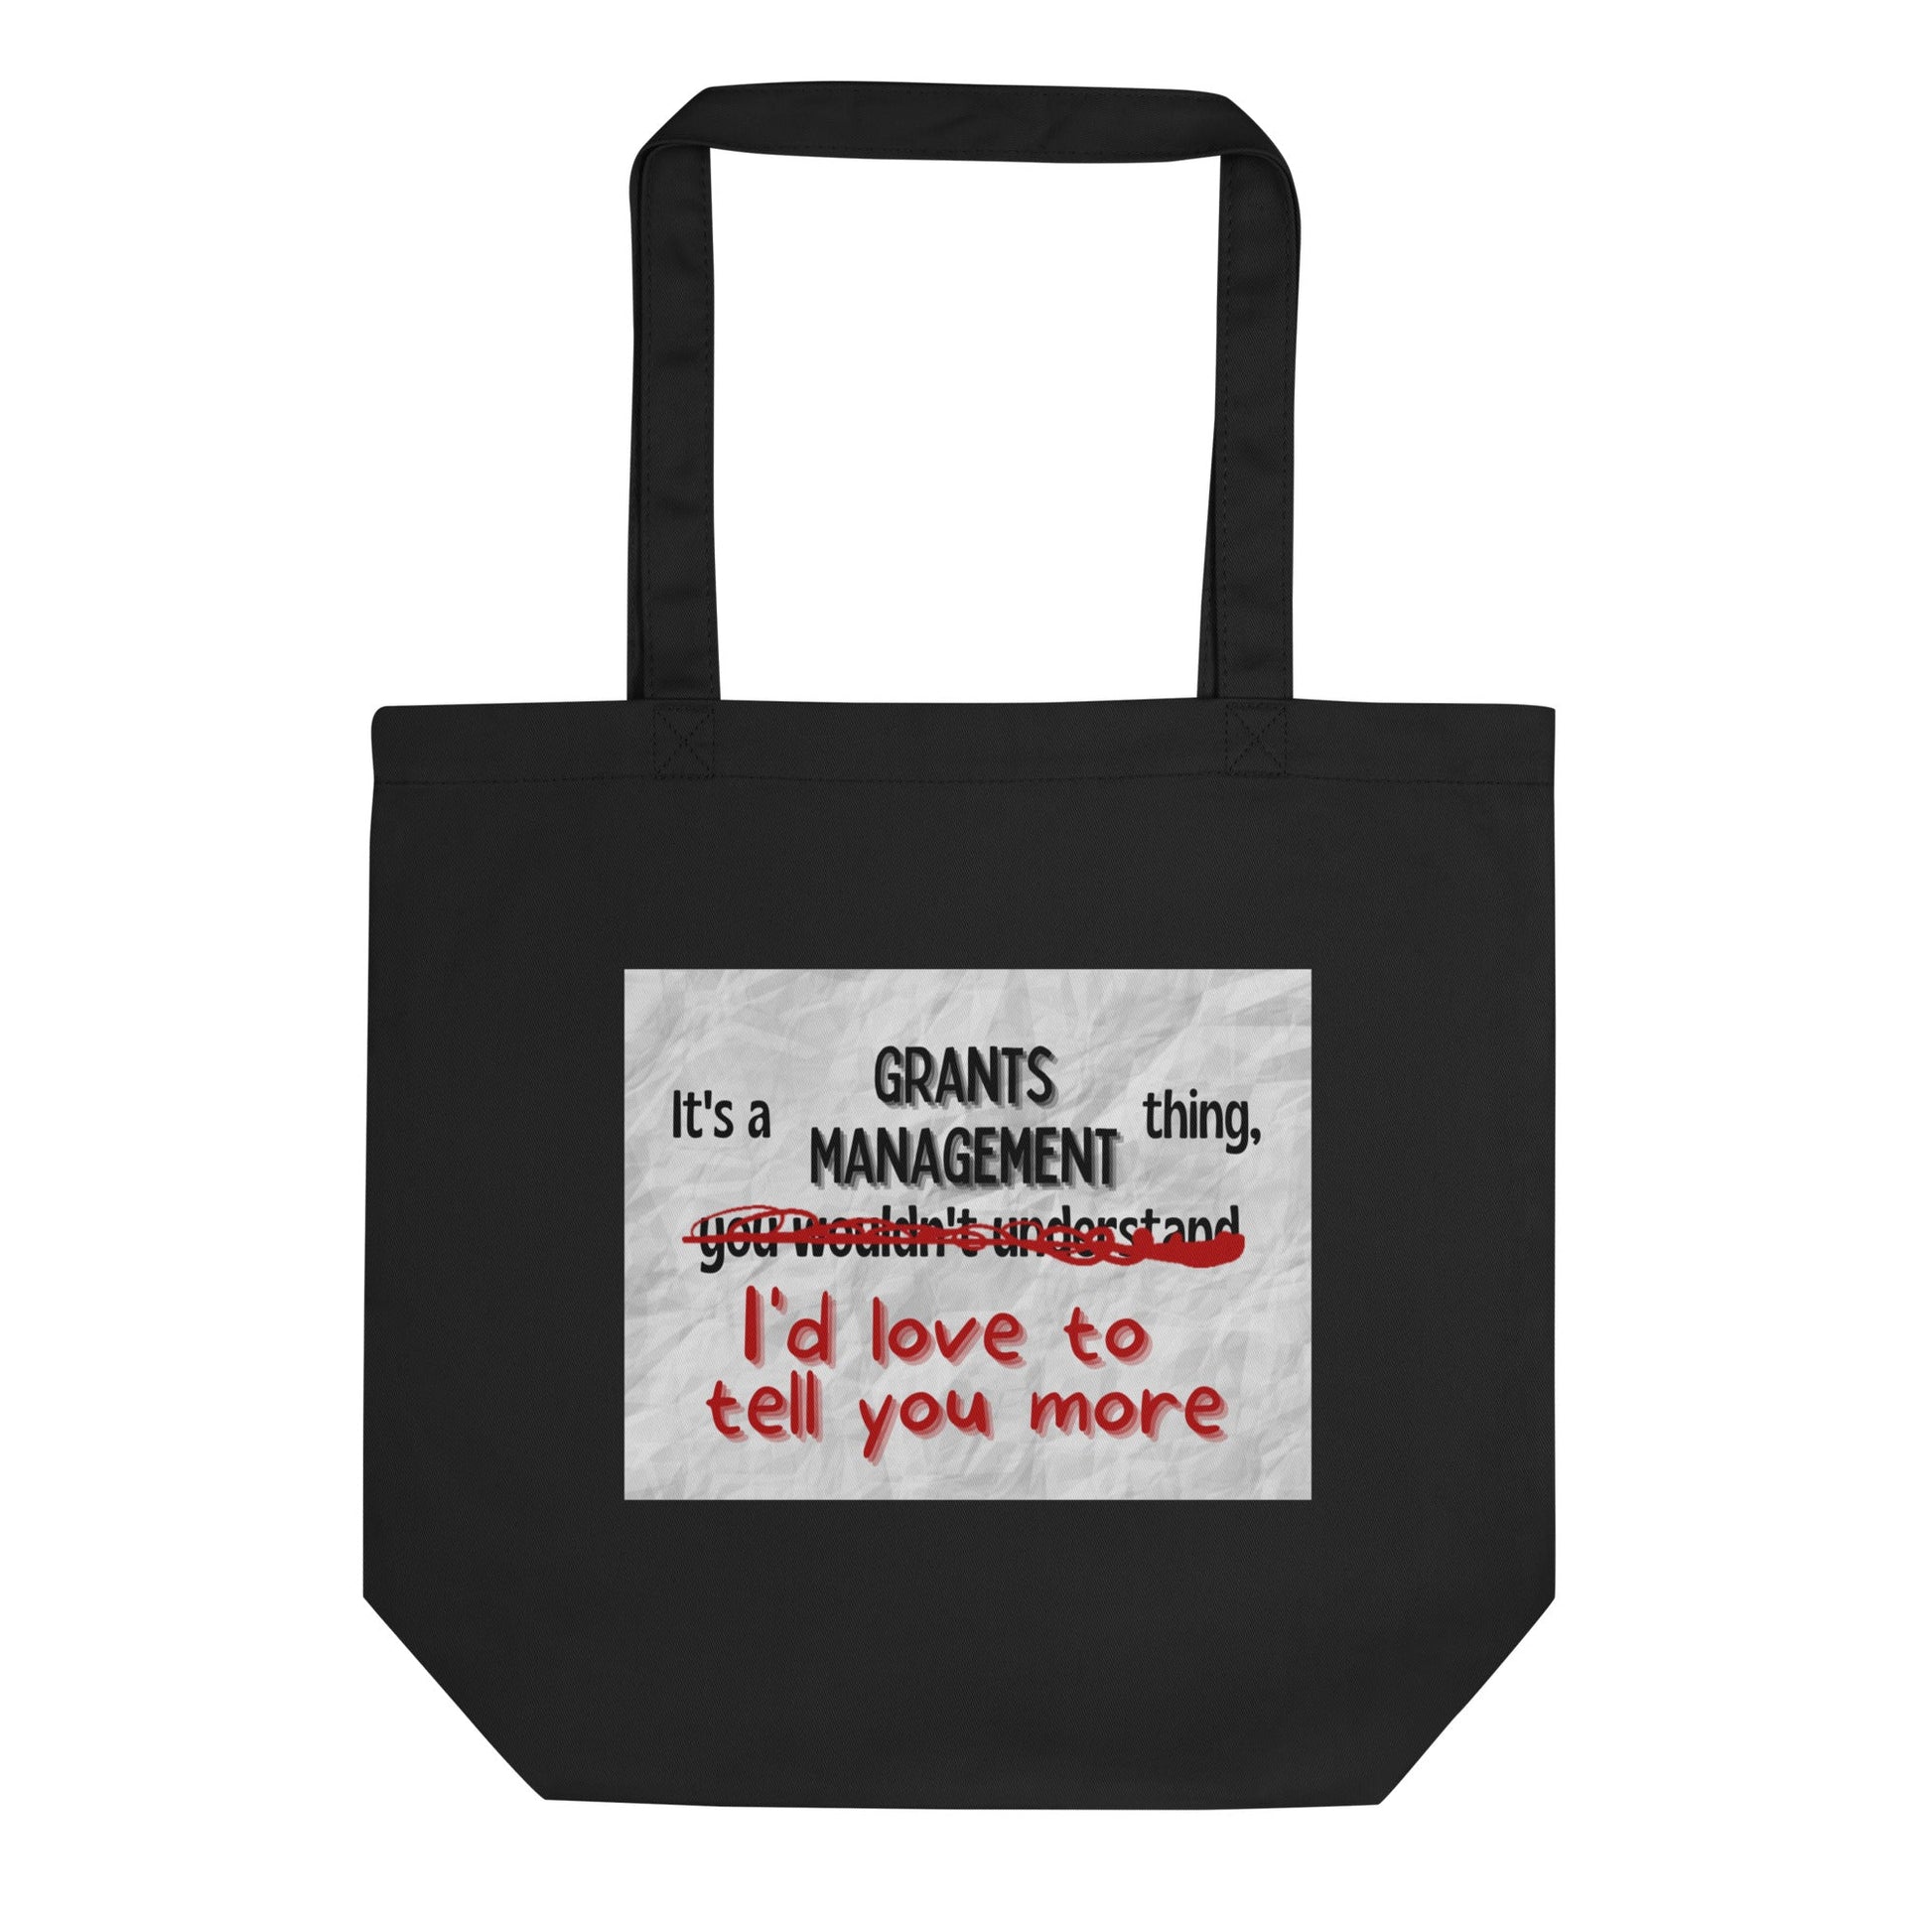 It's a Grants Management Thing Eco Tote Bag-recalciGrant